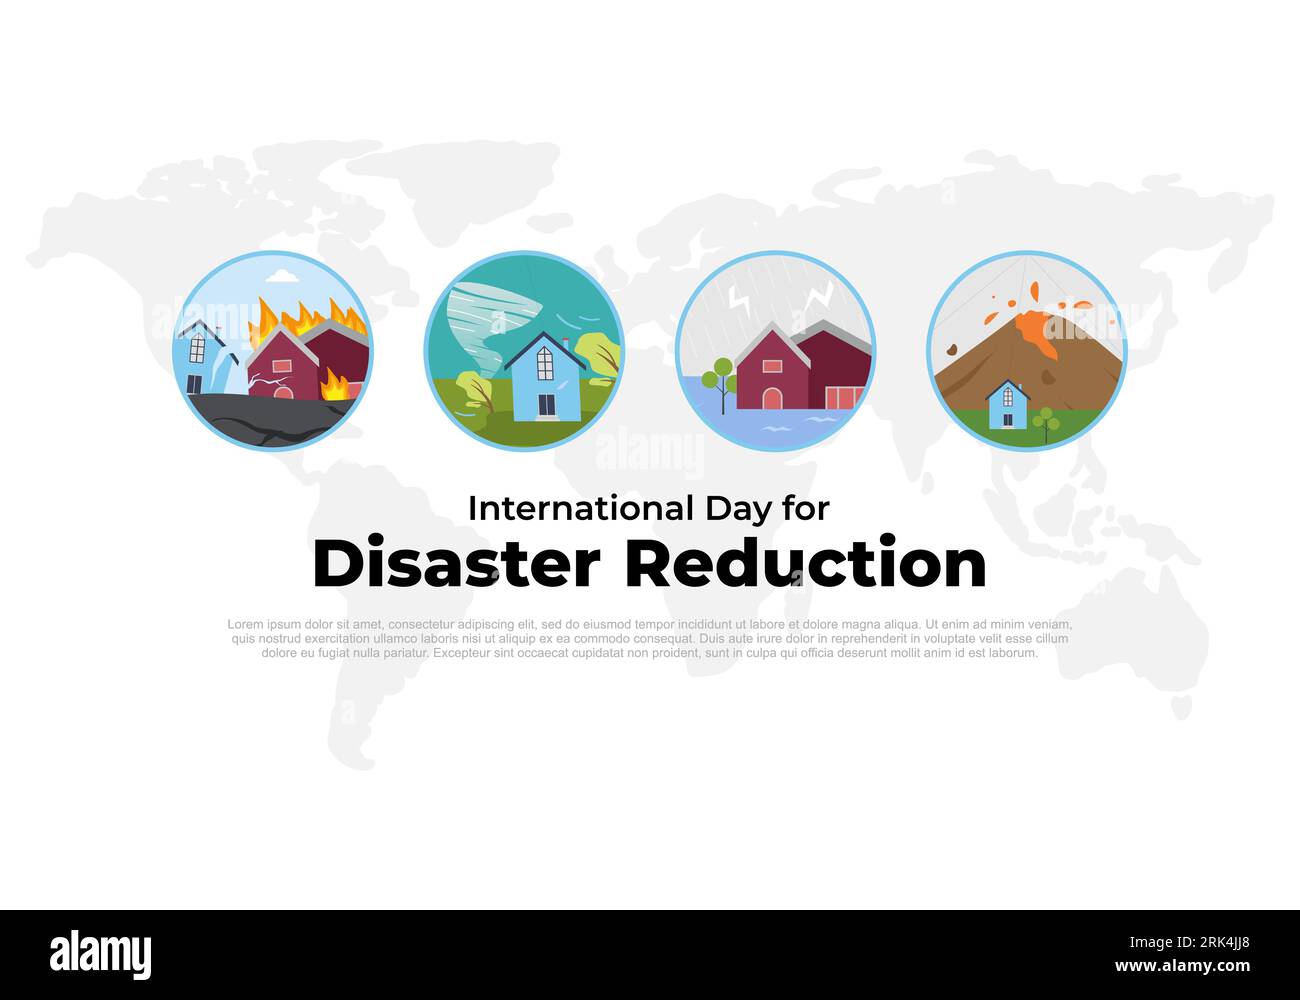 International day for Disaster Reduction celebrated on october 13. Stock Vector